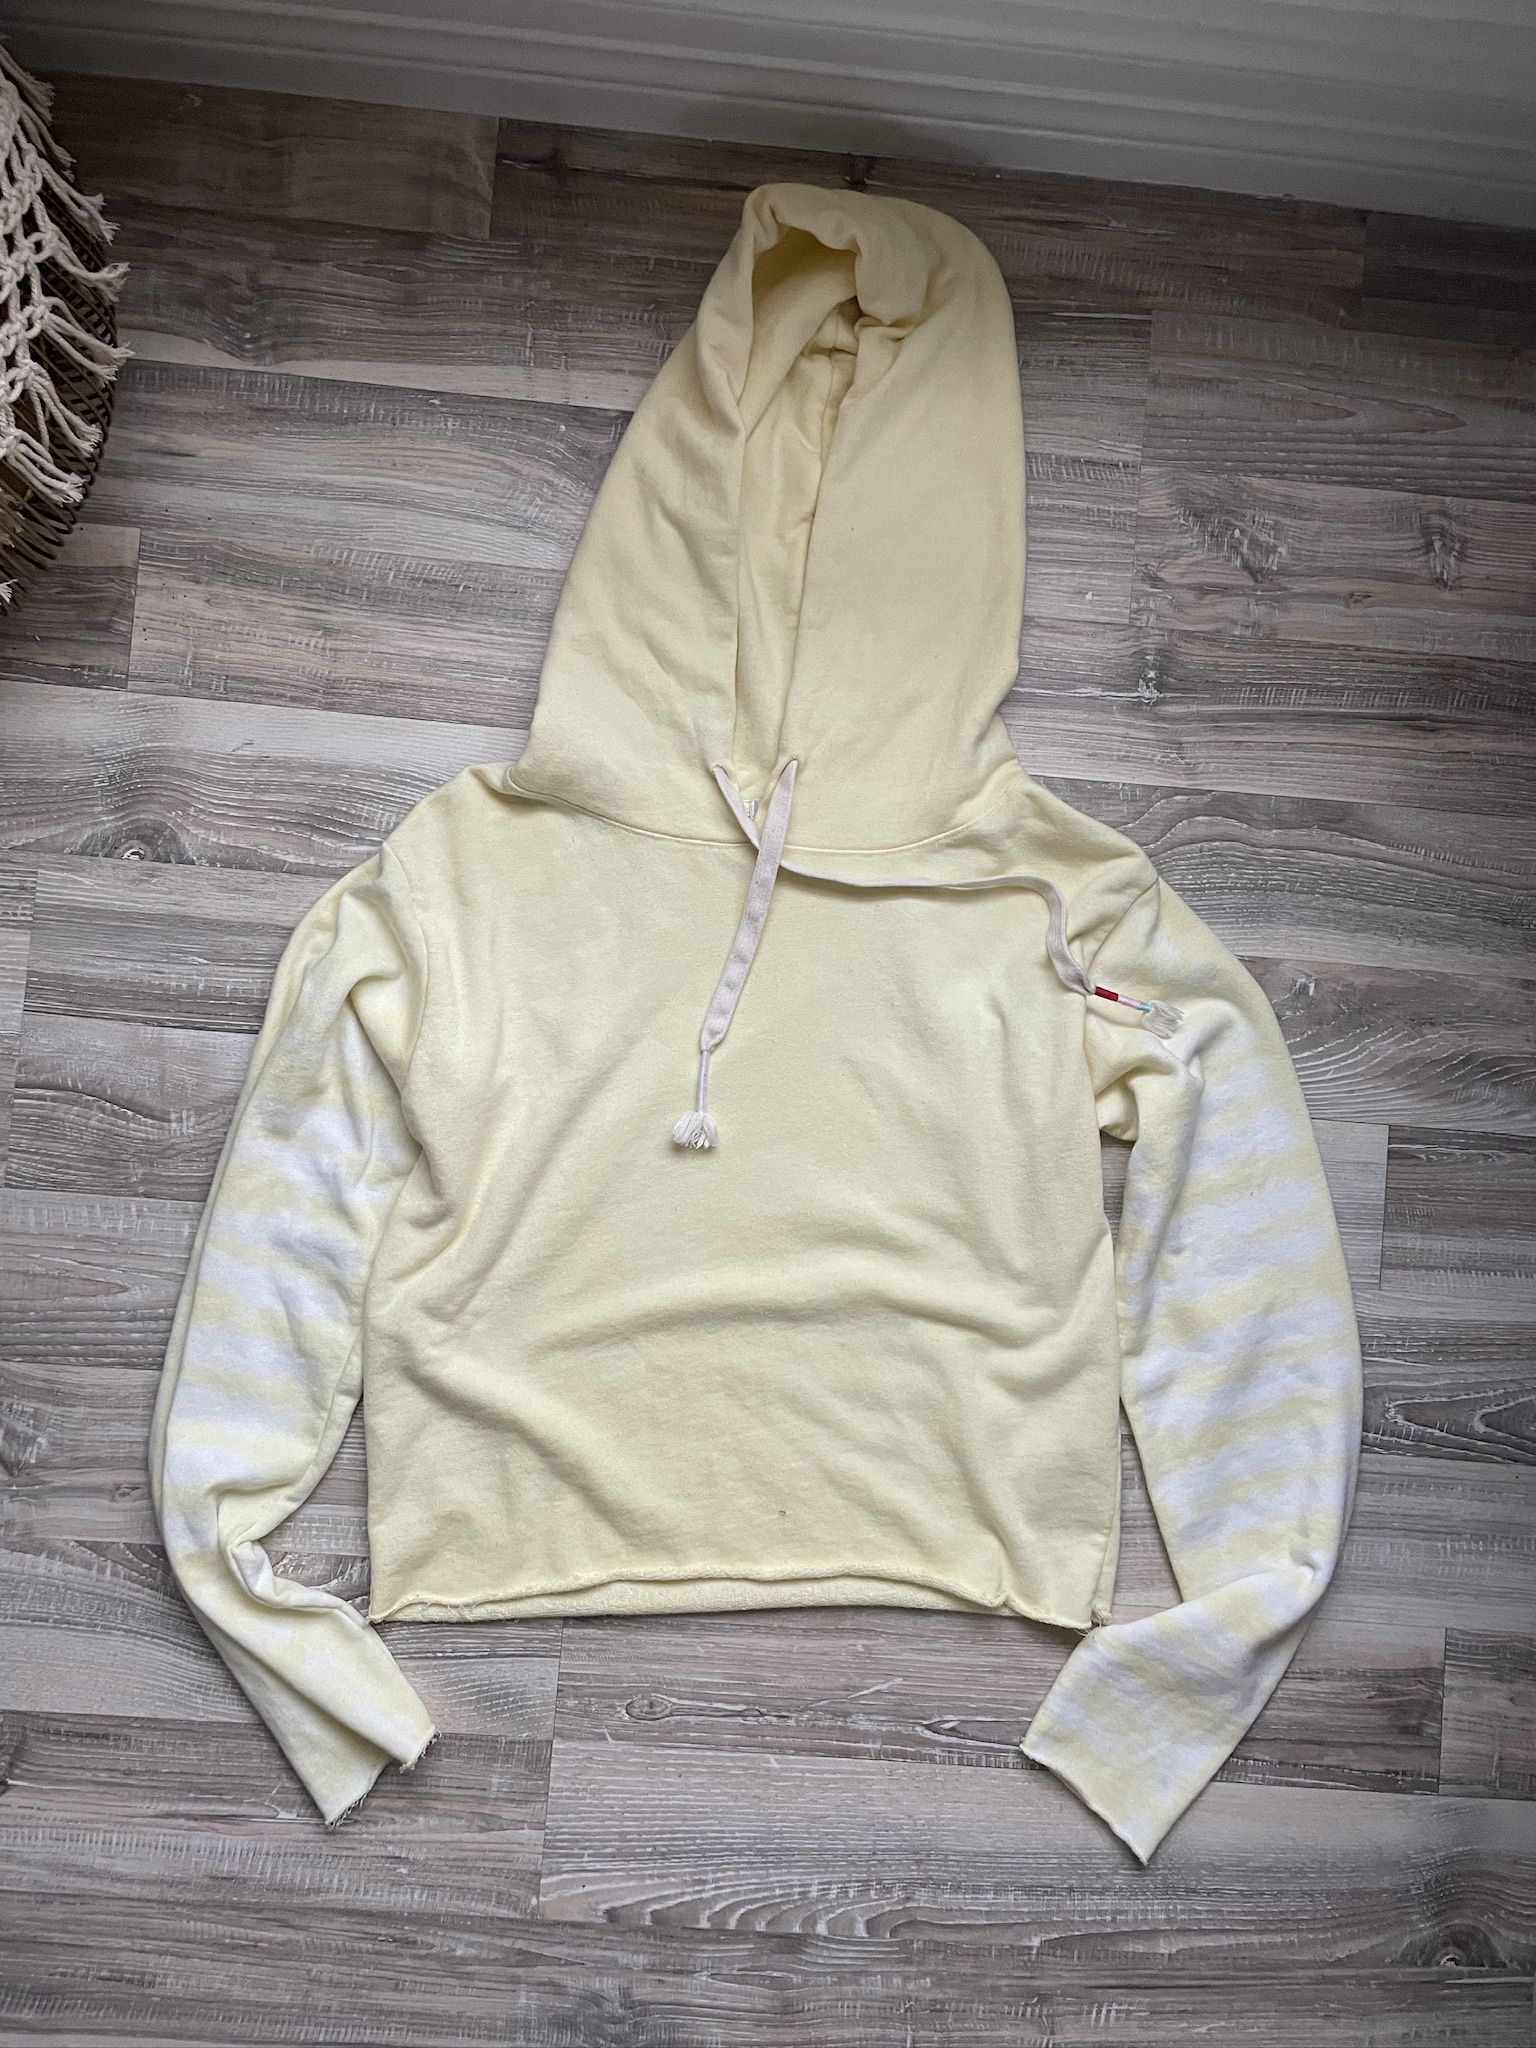 Wildfox Yellow Cropped Hooded Sweater Size Medium Cotton Spring